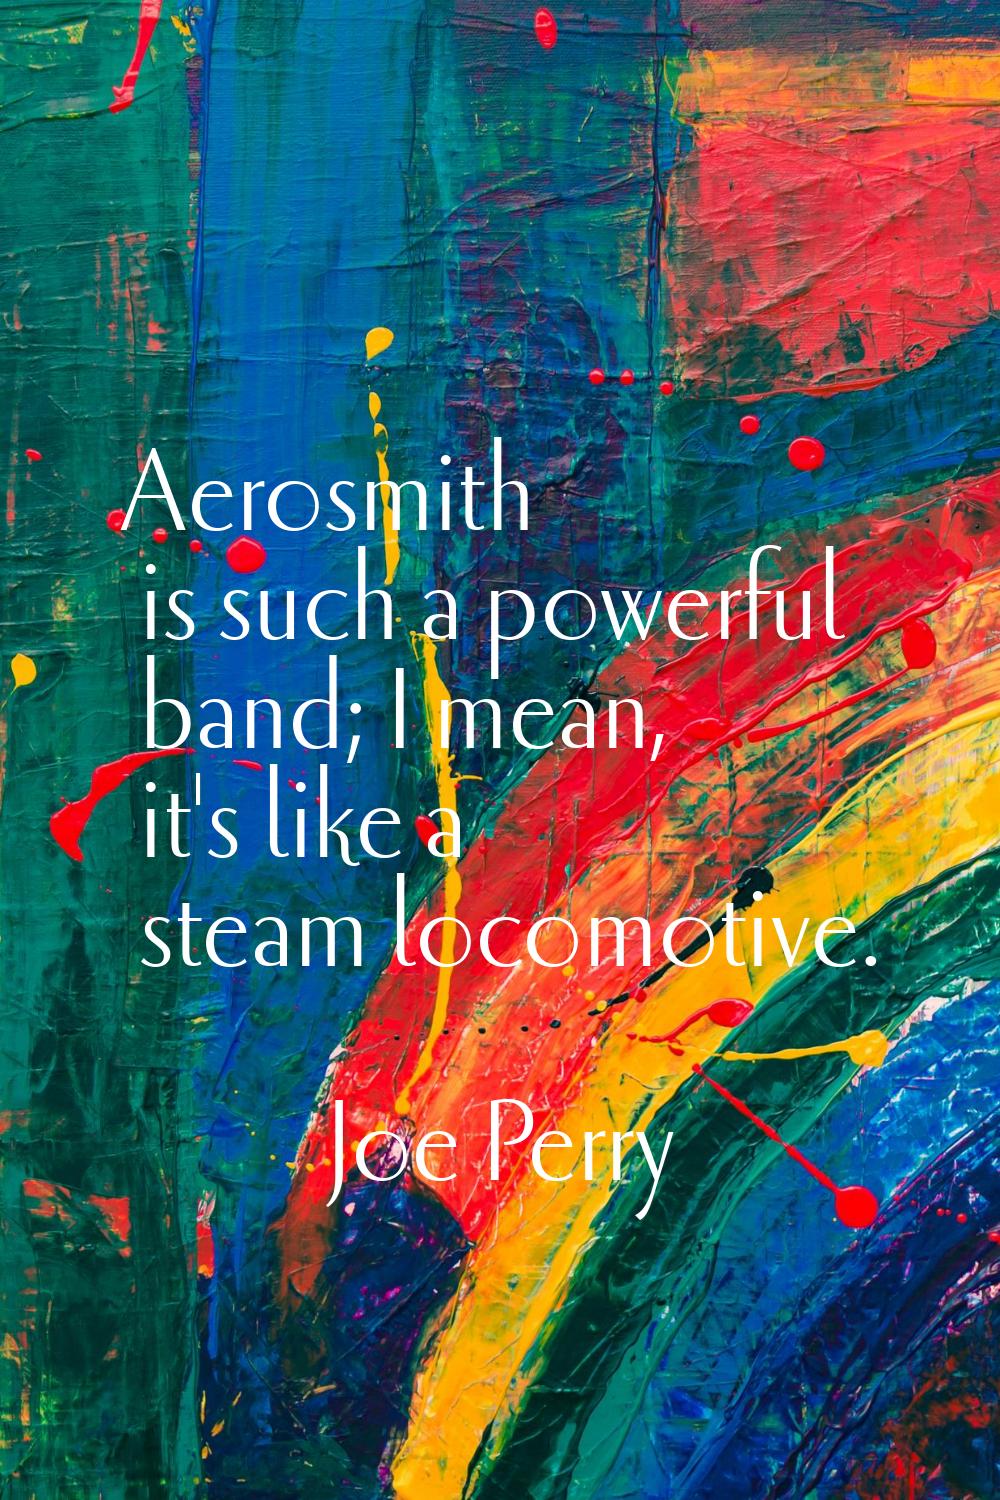 Aerosmith is such a powerful band; I mean, it's like a steam locomotive.